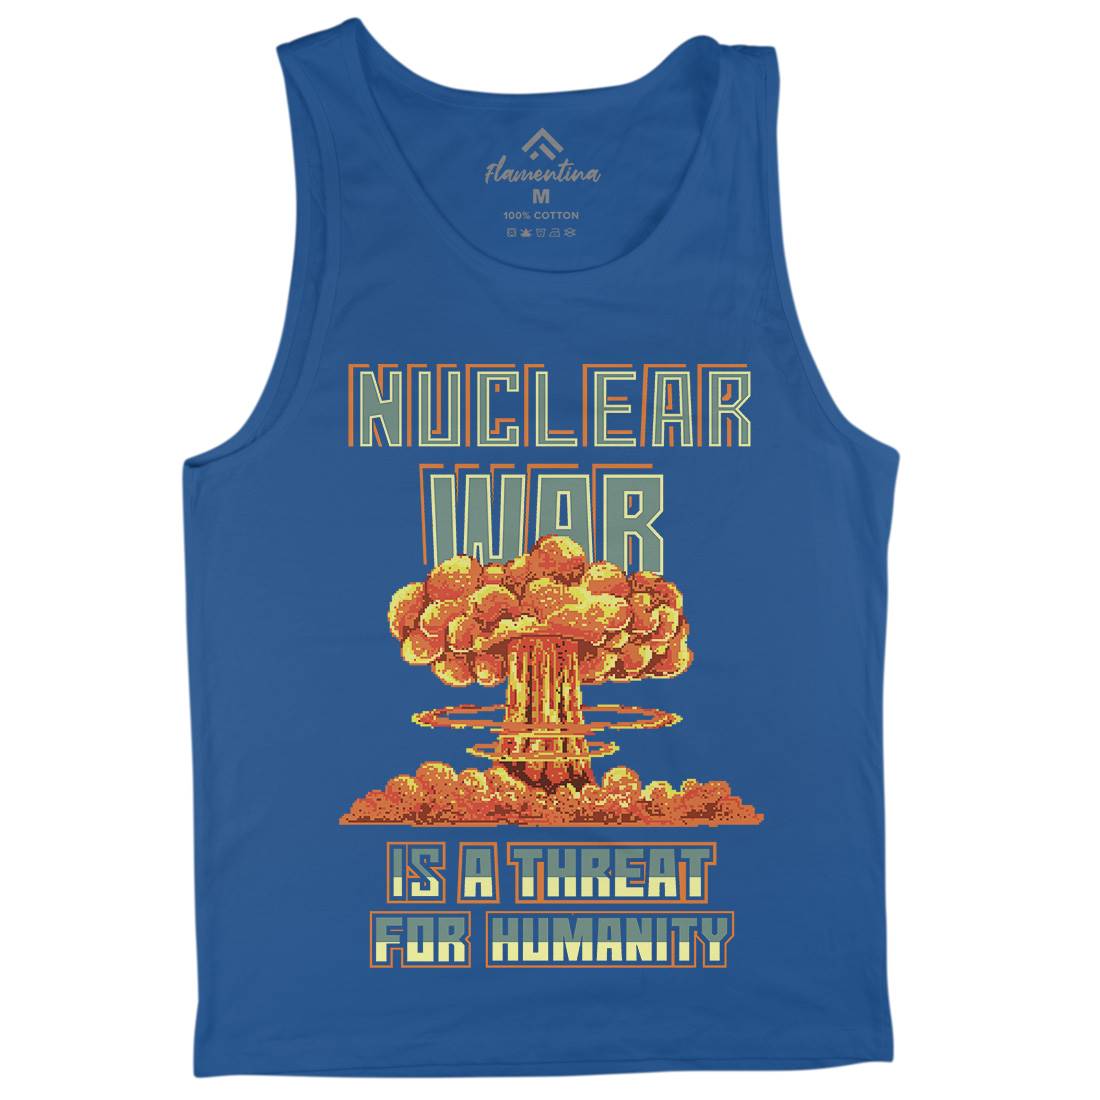 Nuclear War Is A Threat For Humanity Mens Tank Top Vest Army B941